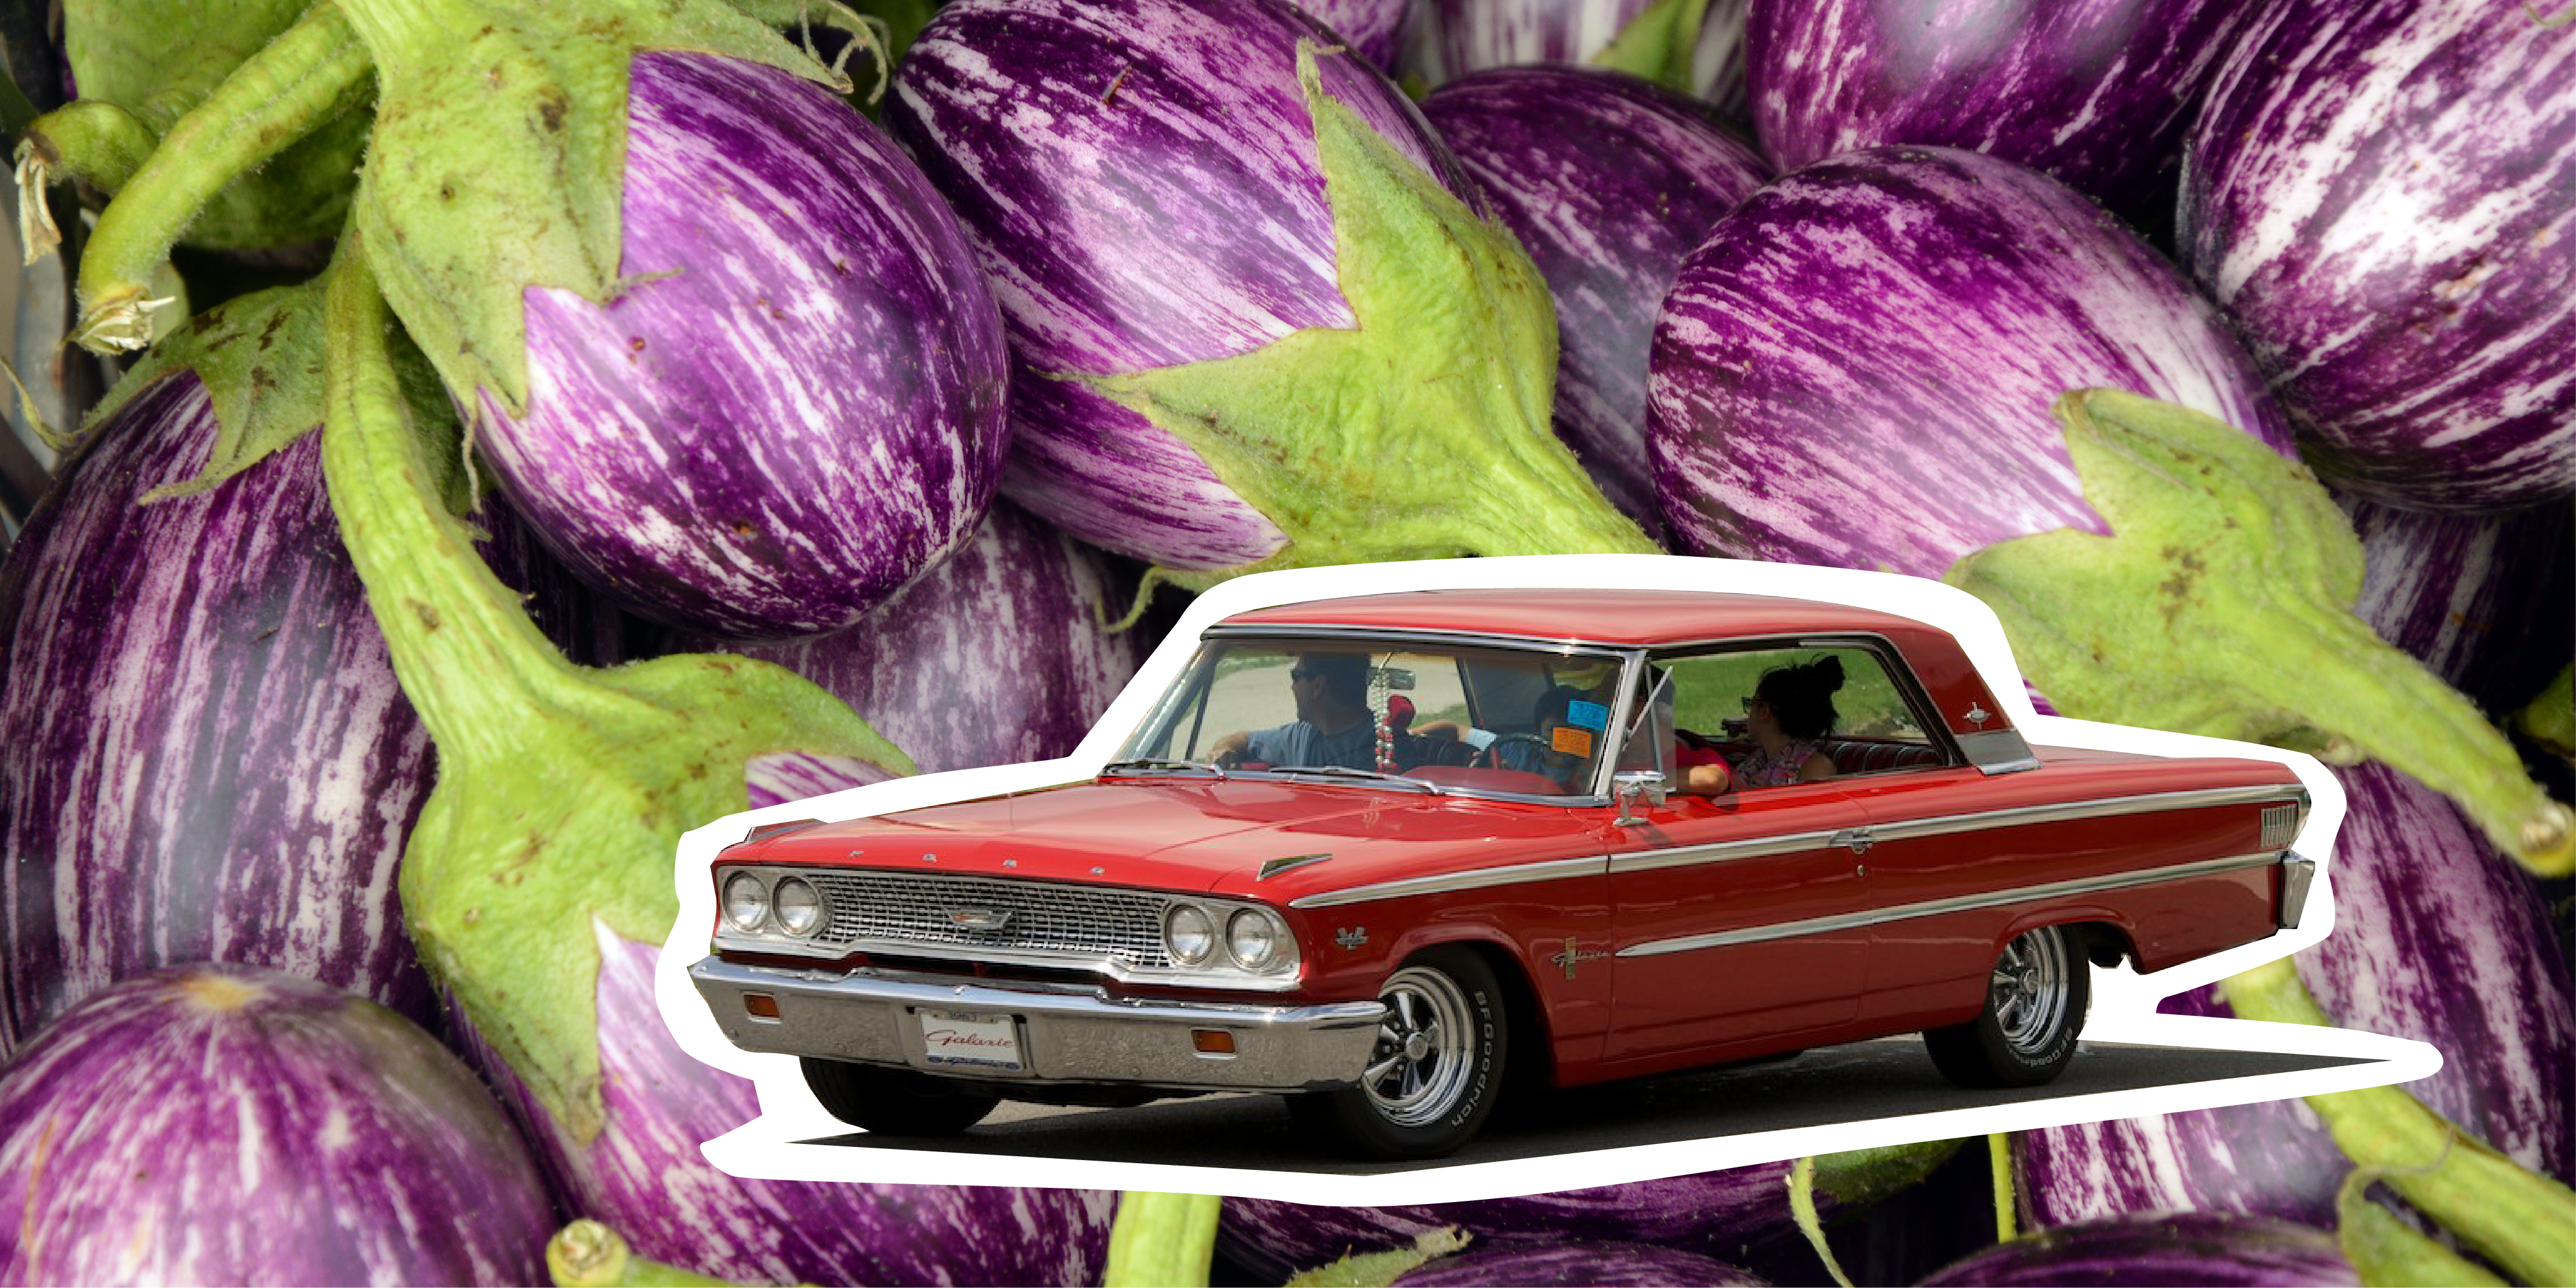 A red Cadillac drives through a background of eggpants.